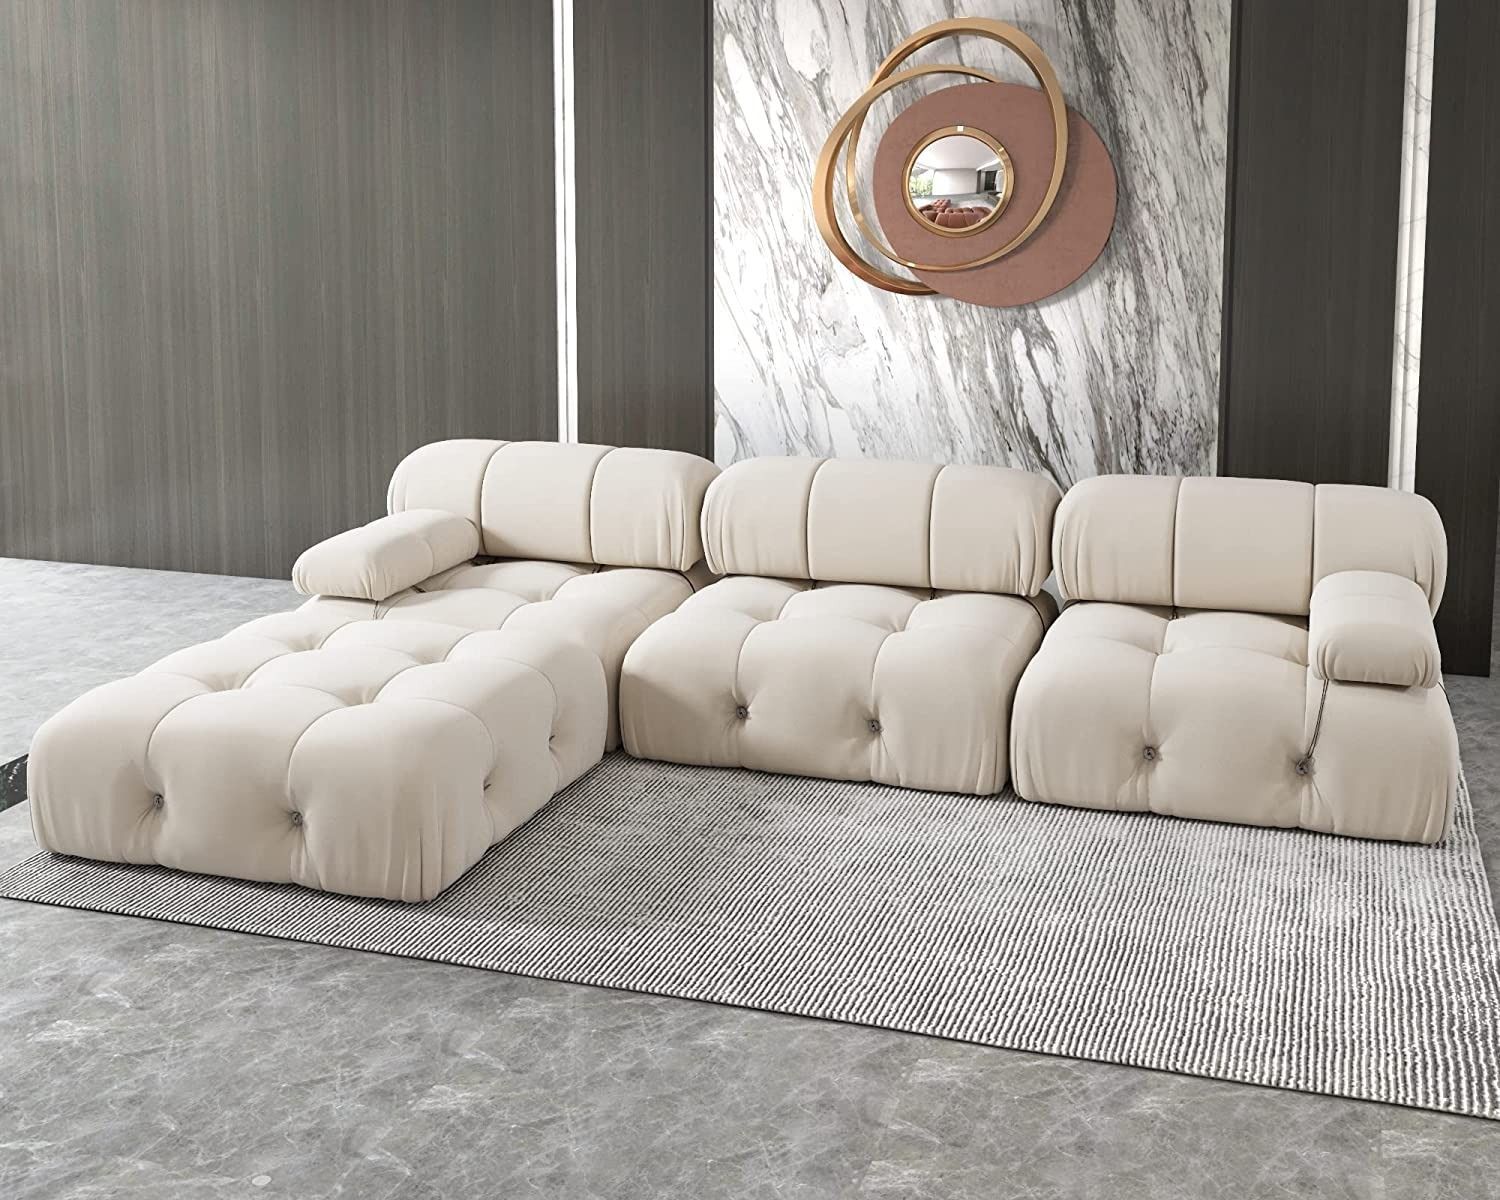 Jach 104" Convertible Modular Sectional Sofa, L Shaped Minimalist Inside 104" Sectional Sofas (View 15 of 15)